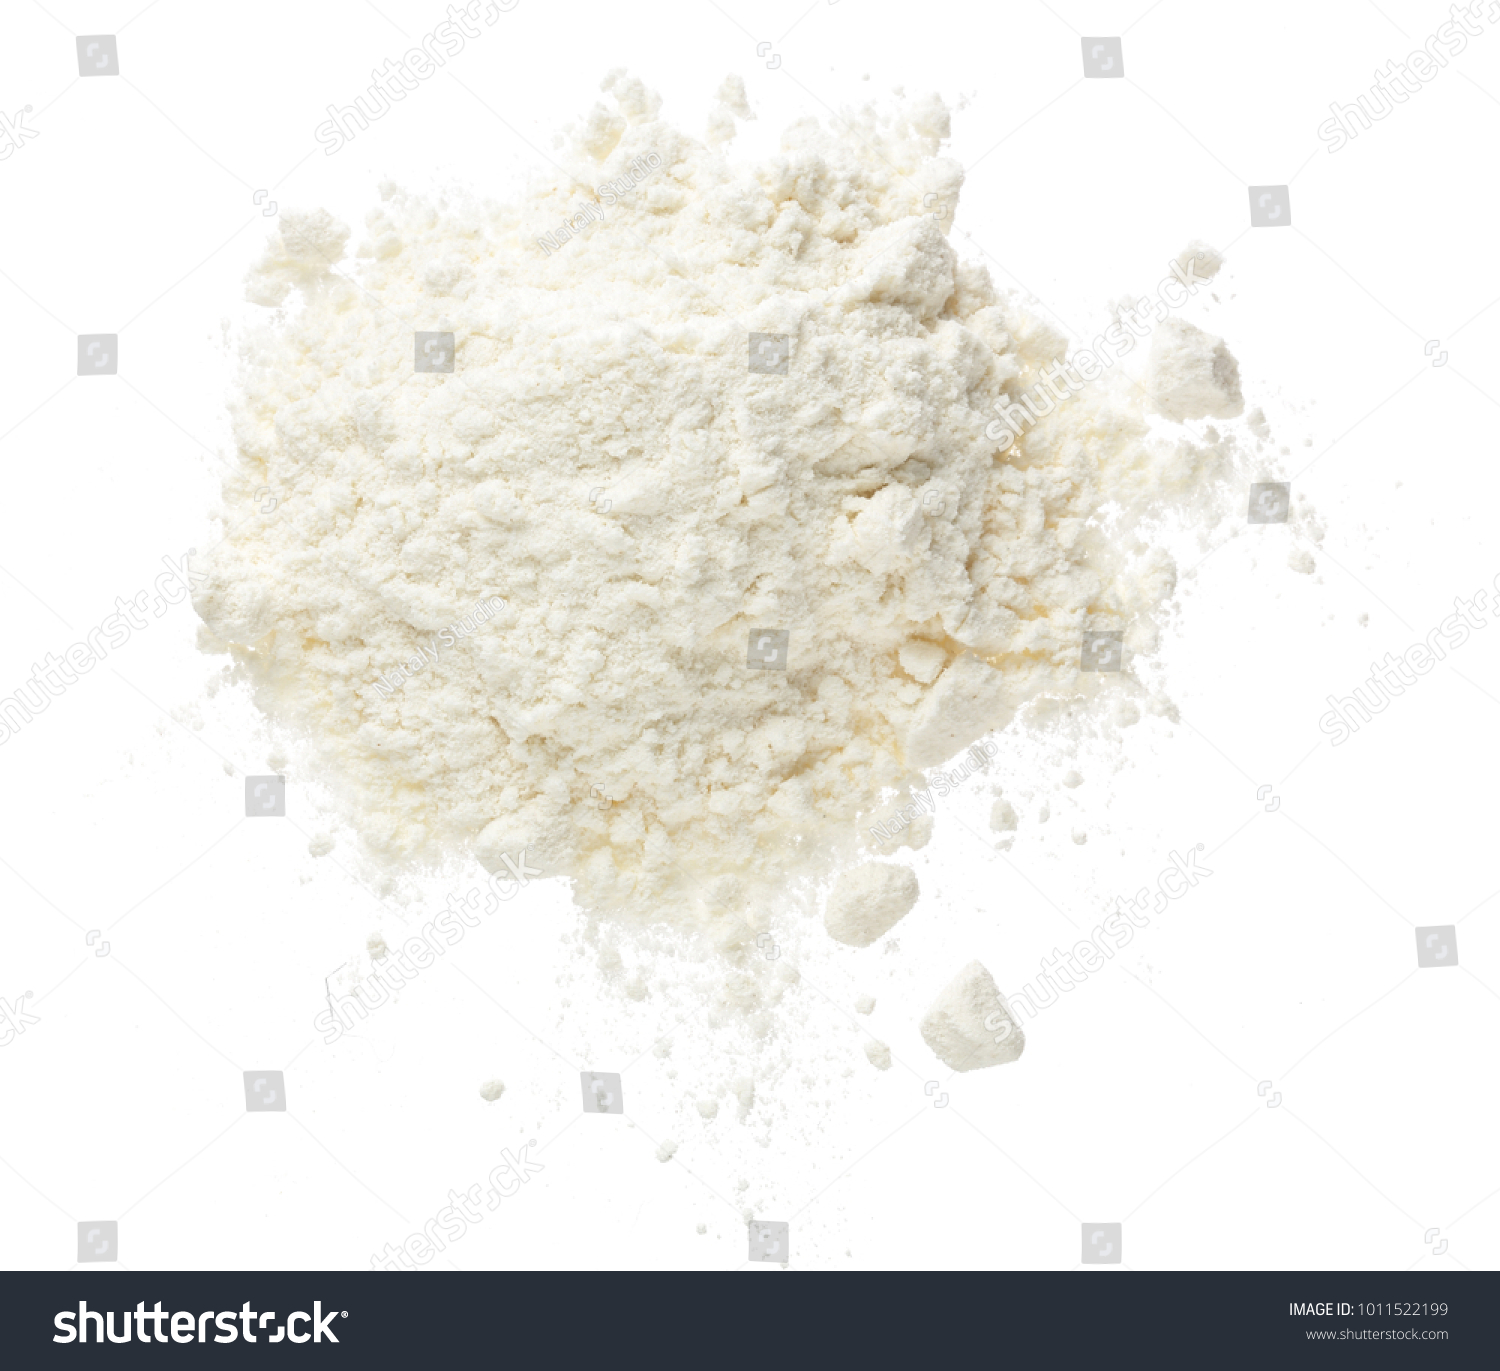 Pile of flour isolated on white background. Top view. Flat lay #1011522199